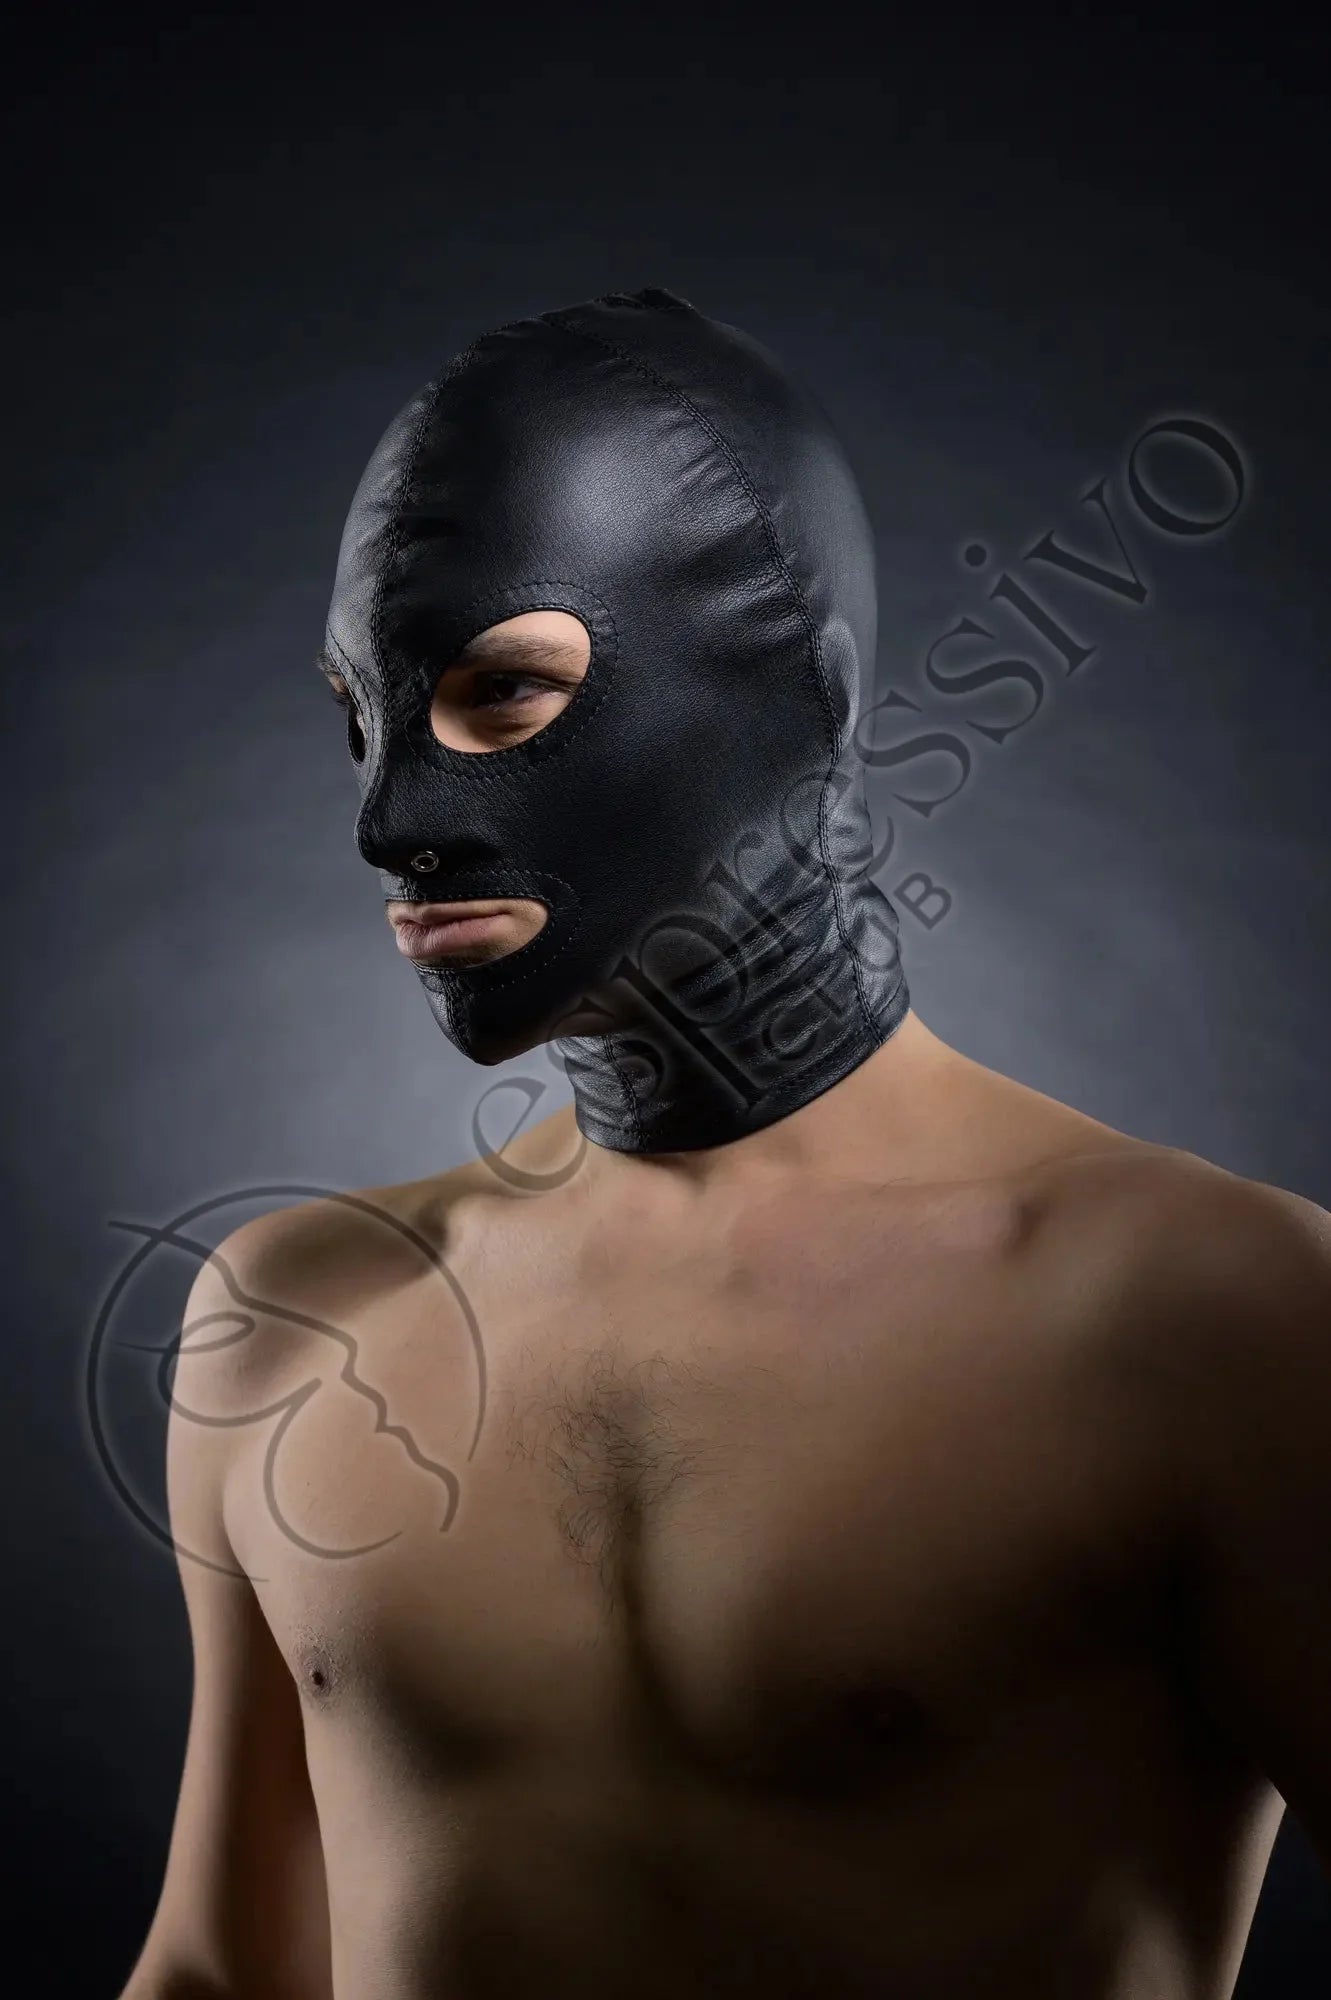 Tight Leather BDSM Hood - Open Eyes & Mouth Male Model